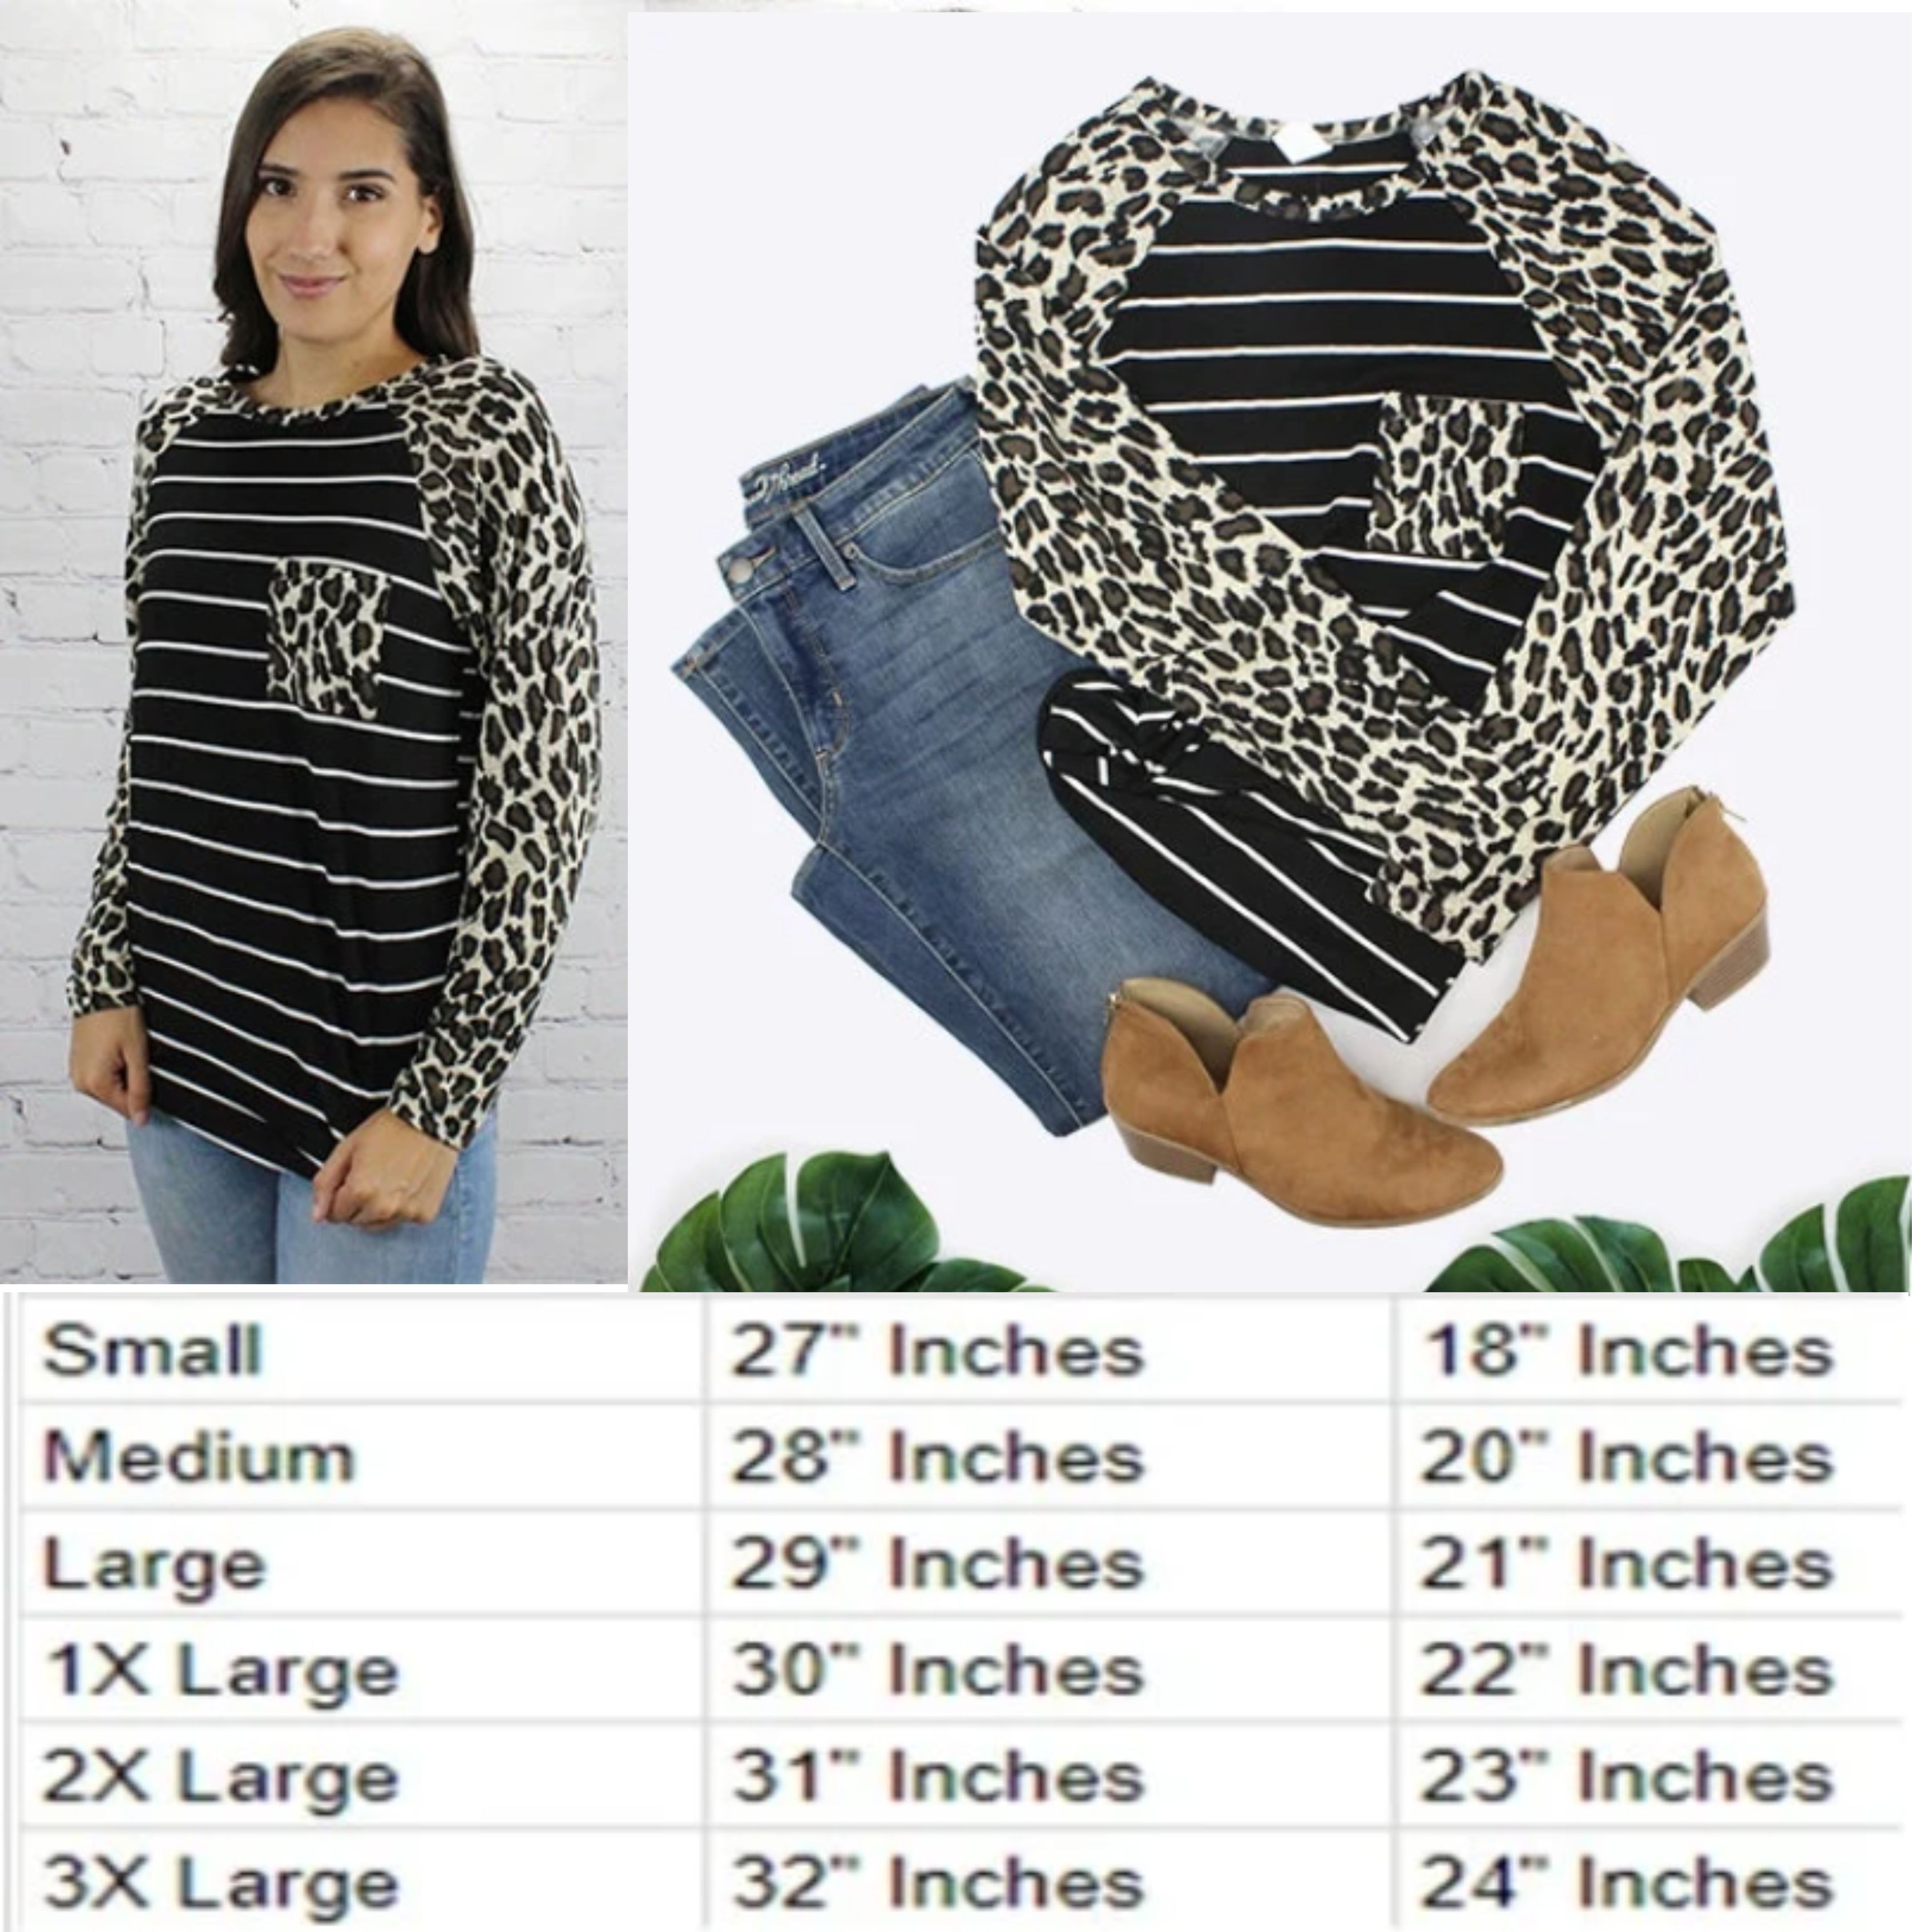 Leopard and Stripes Long Sleeve Top with Pocket 3XL - 10363